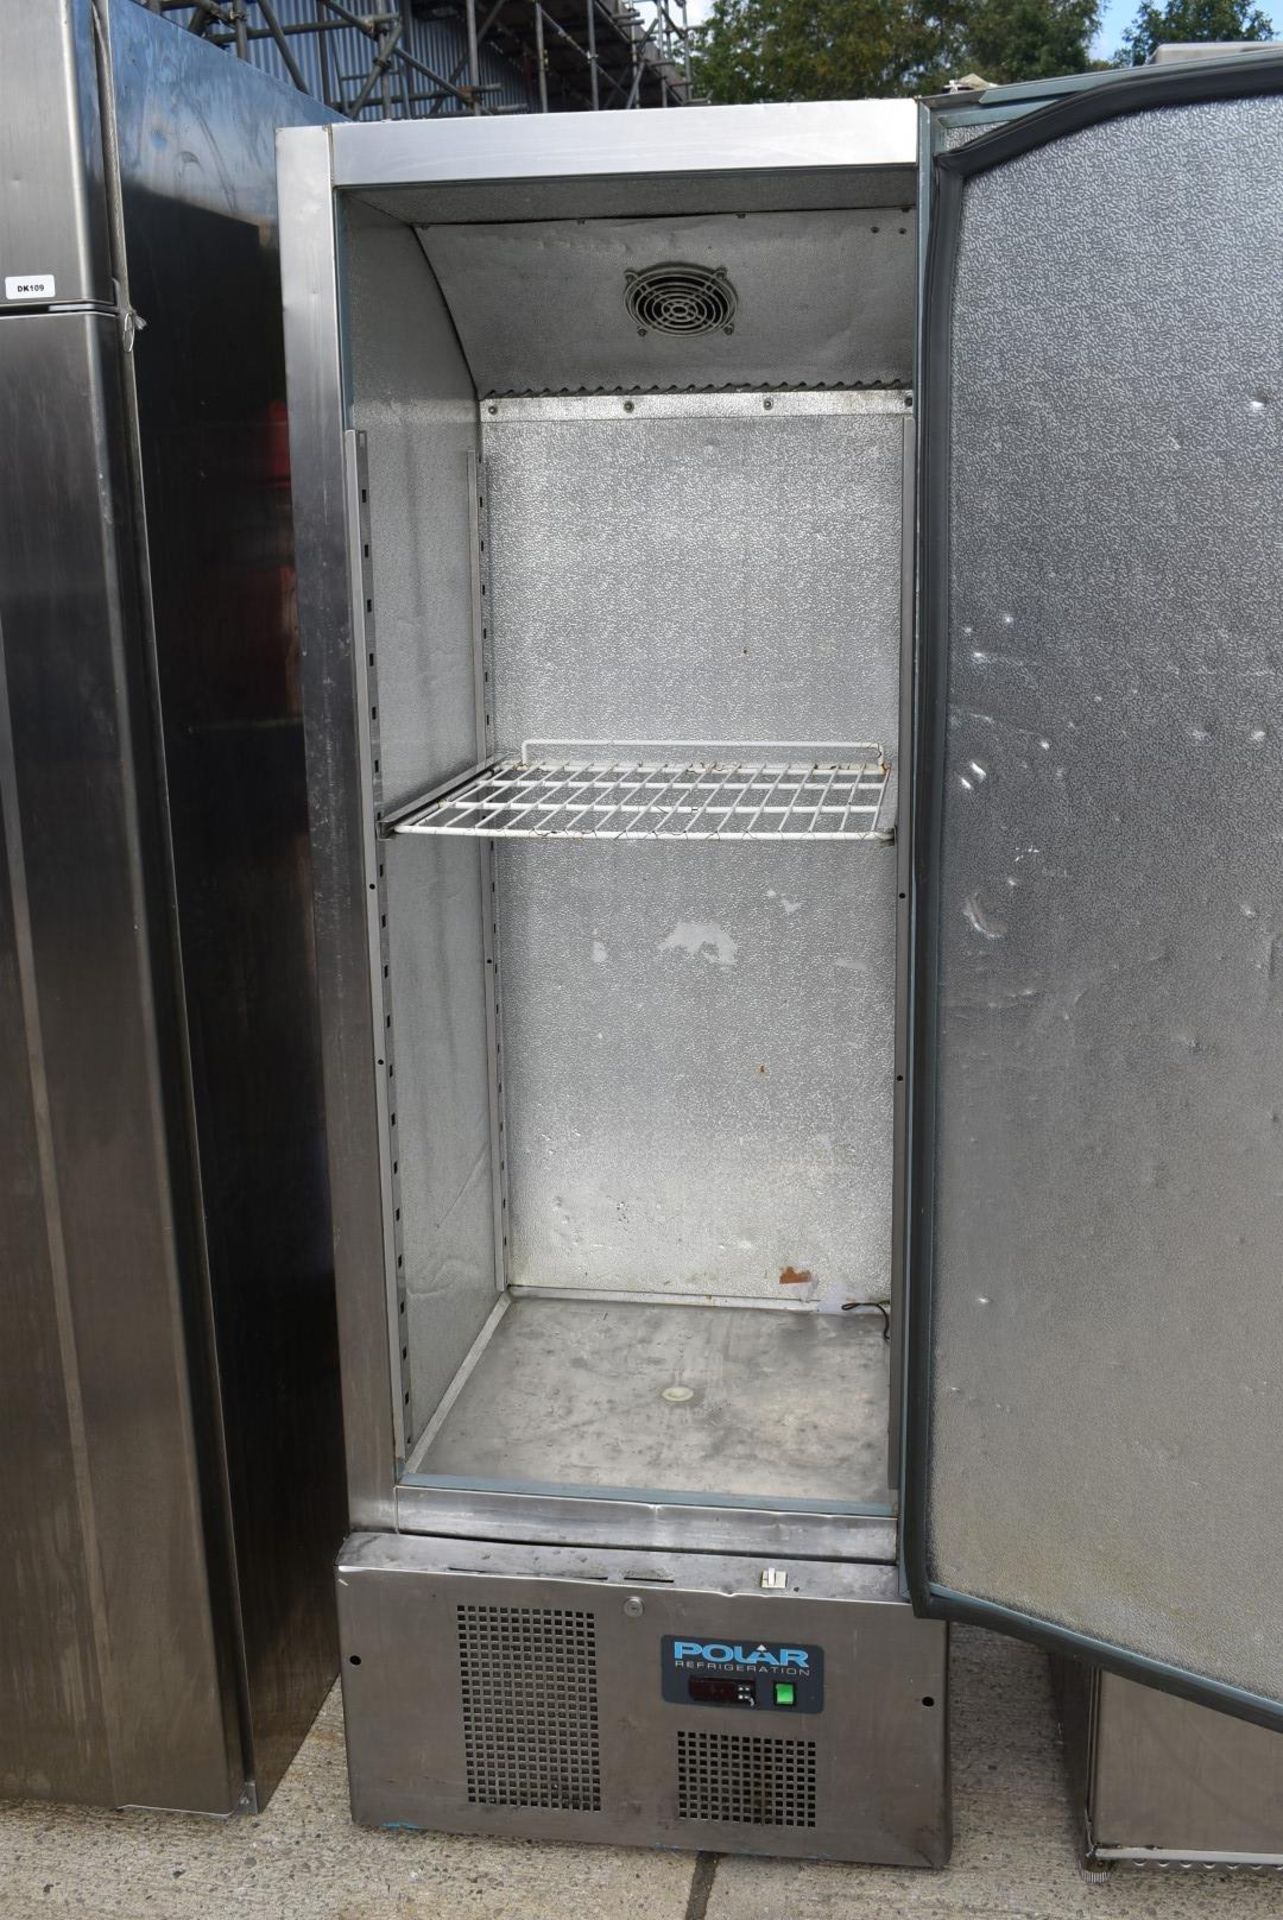 1 x Polar G590 Upright Commercial Fridge - Size: H188 x W65 x D70 cms - Recently Removed From a Dark - Image 5 of 6